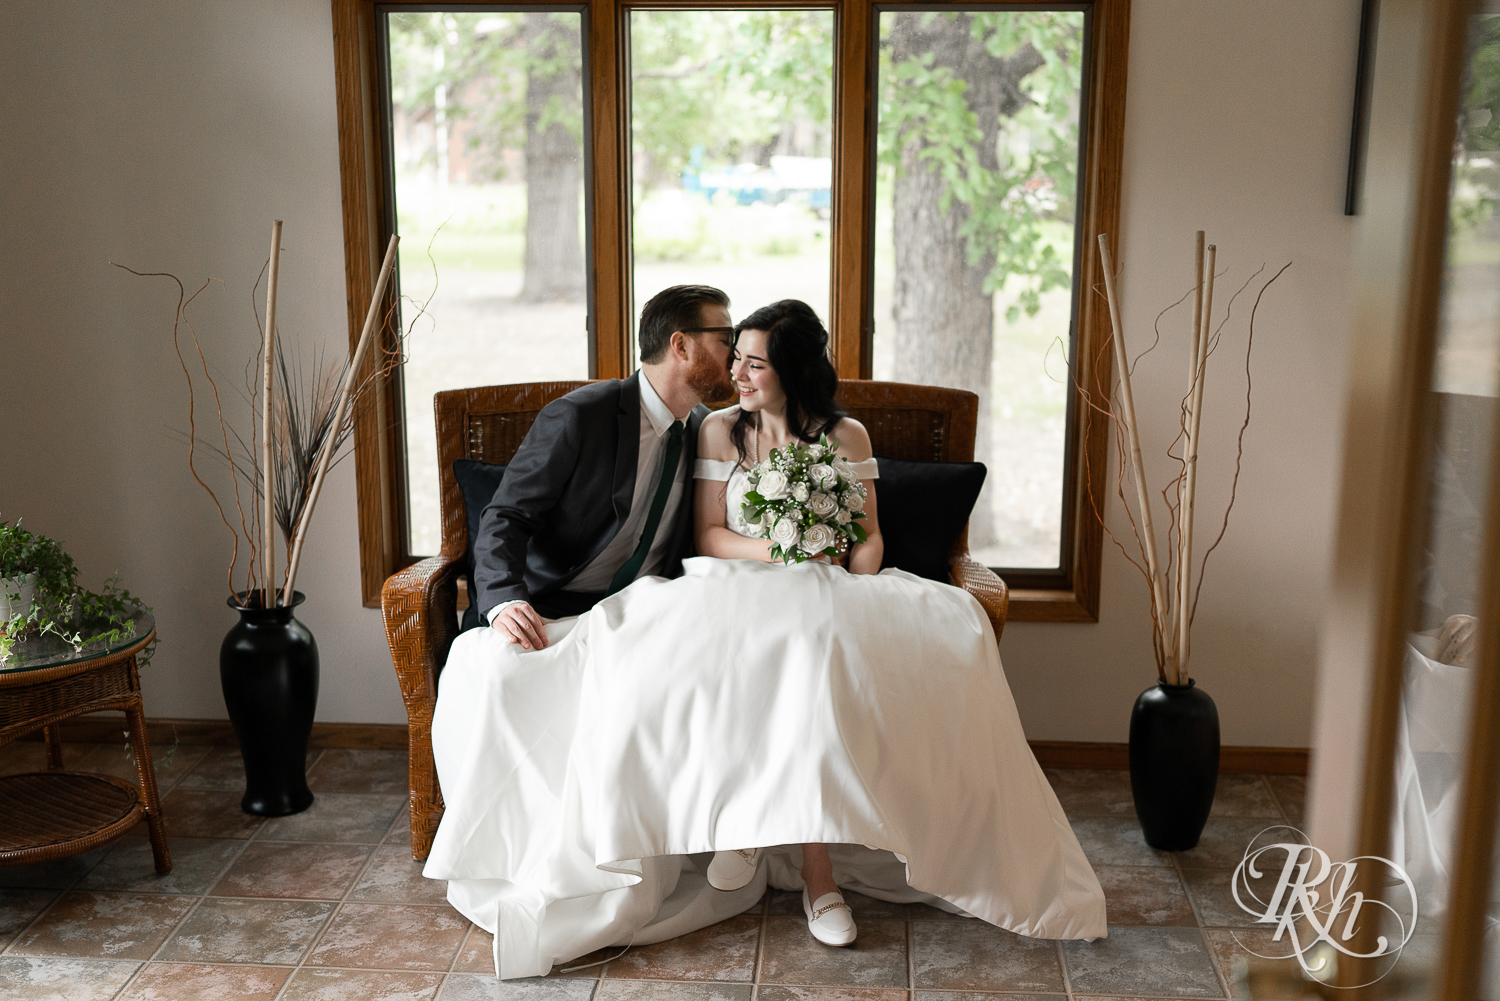 Bride and groom kiss at their house wedding in Sartell, Minnesota.